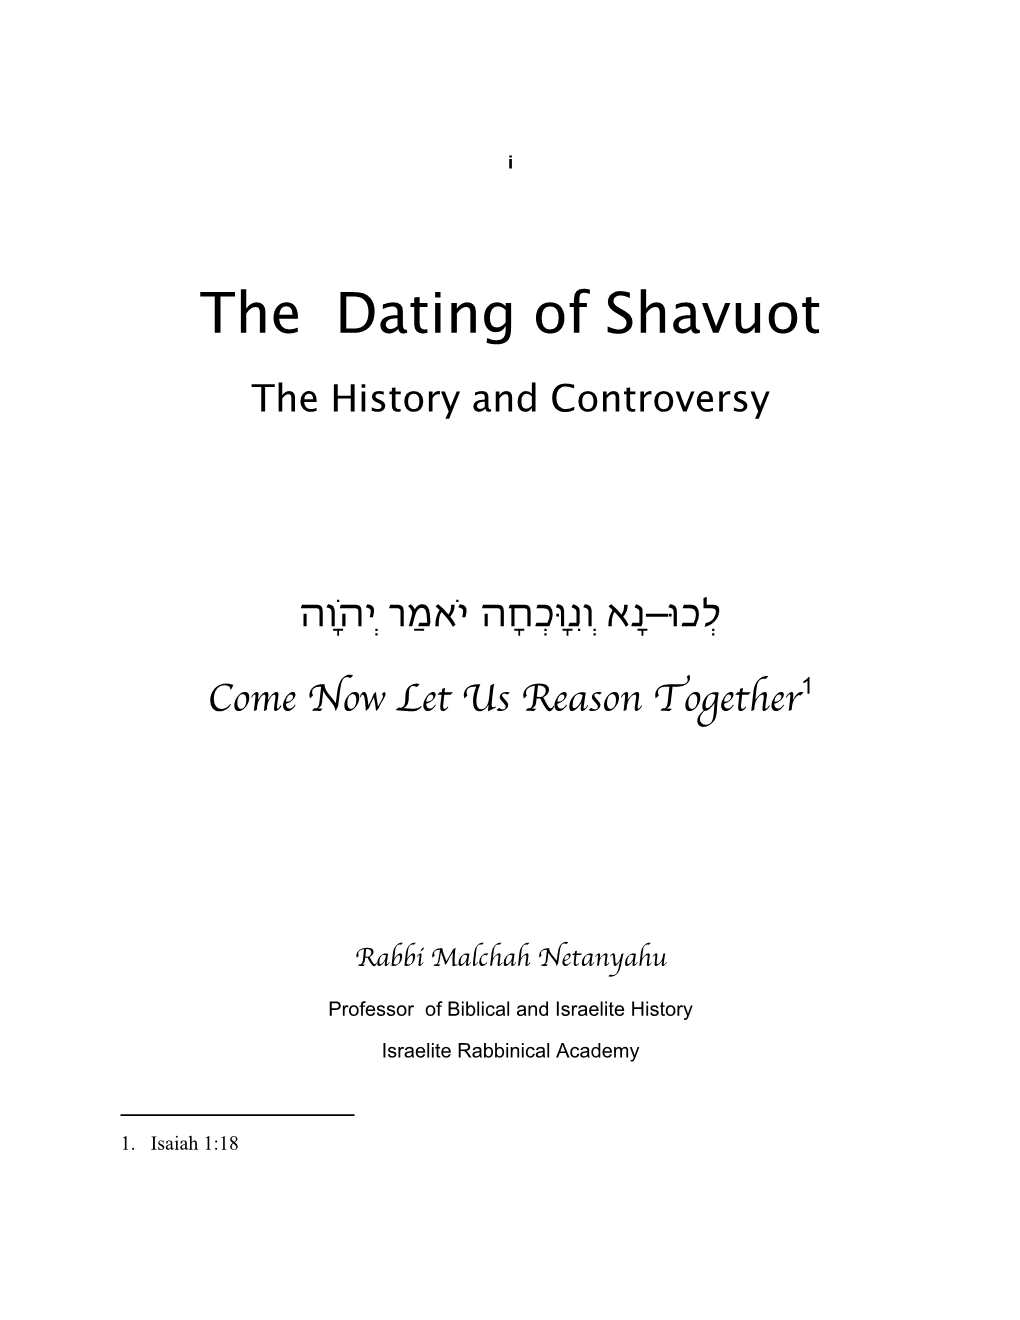 The Dating of Shavuot the History and Controversy